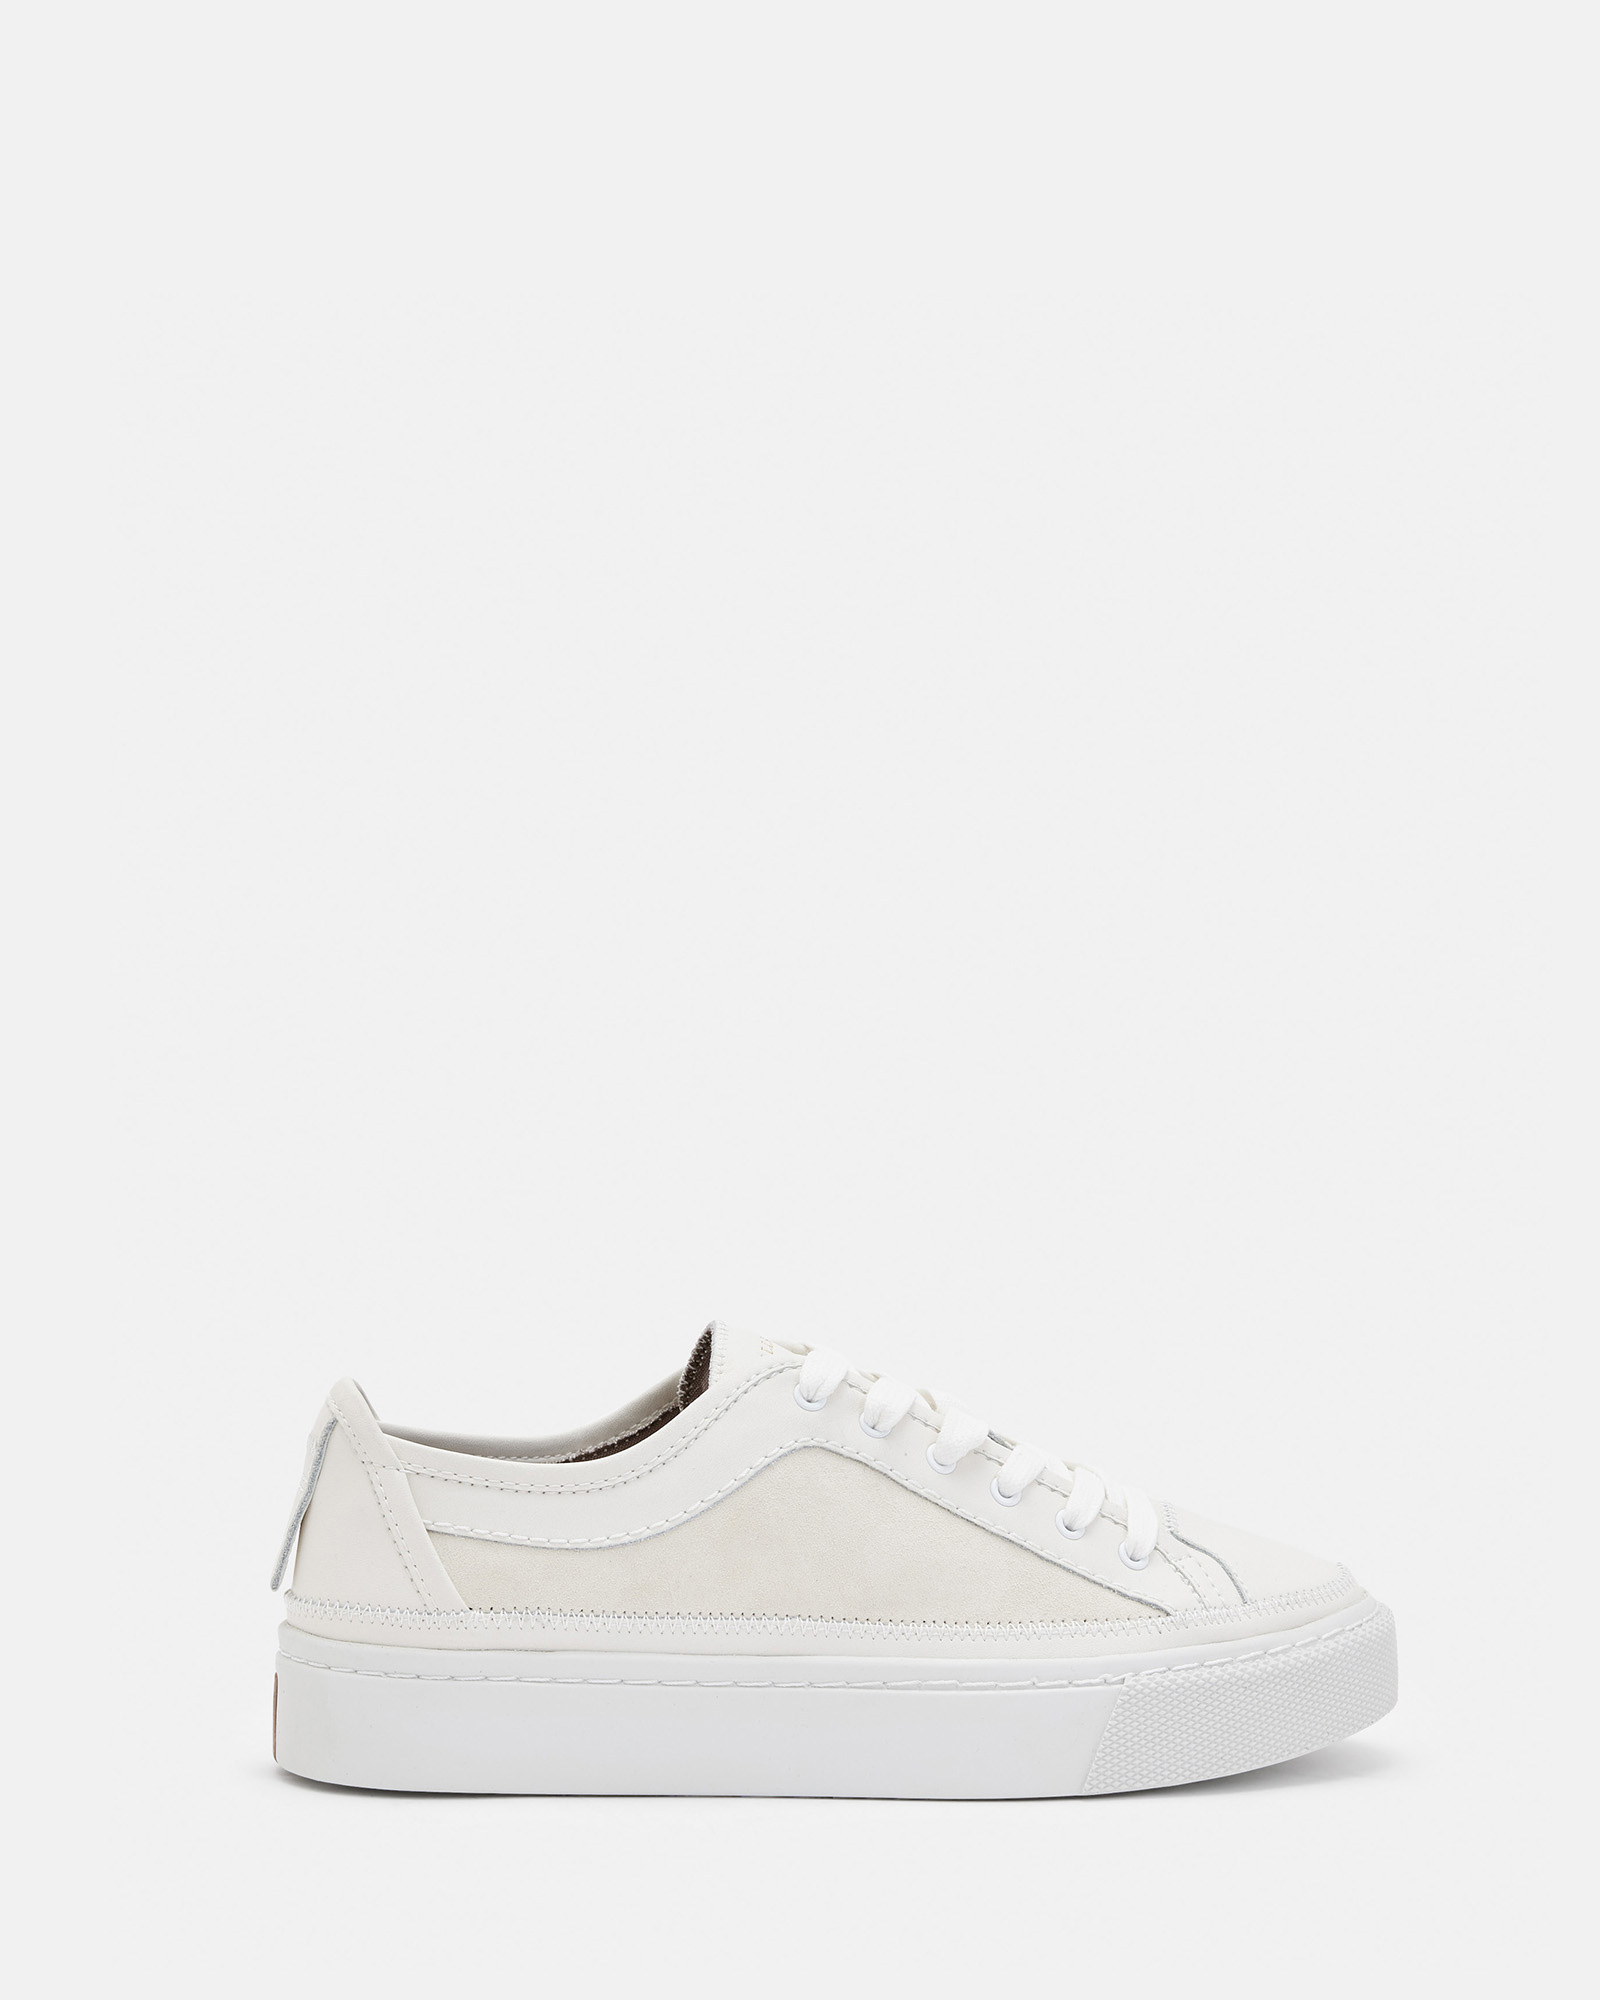 AllSaints Milla Suede Lace Up Sneakers,, Chalk White